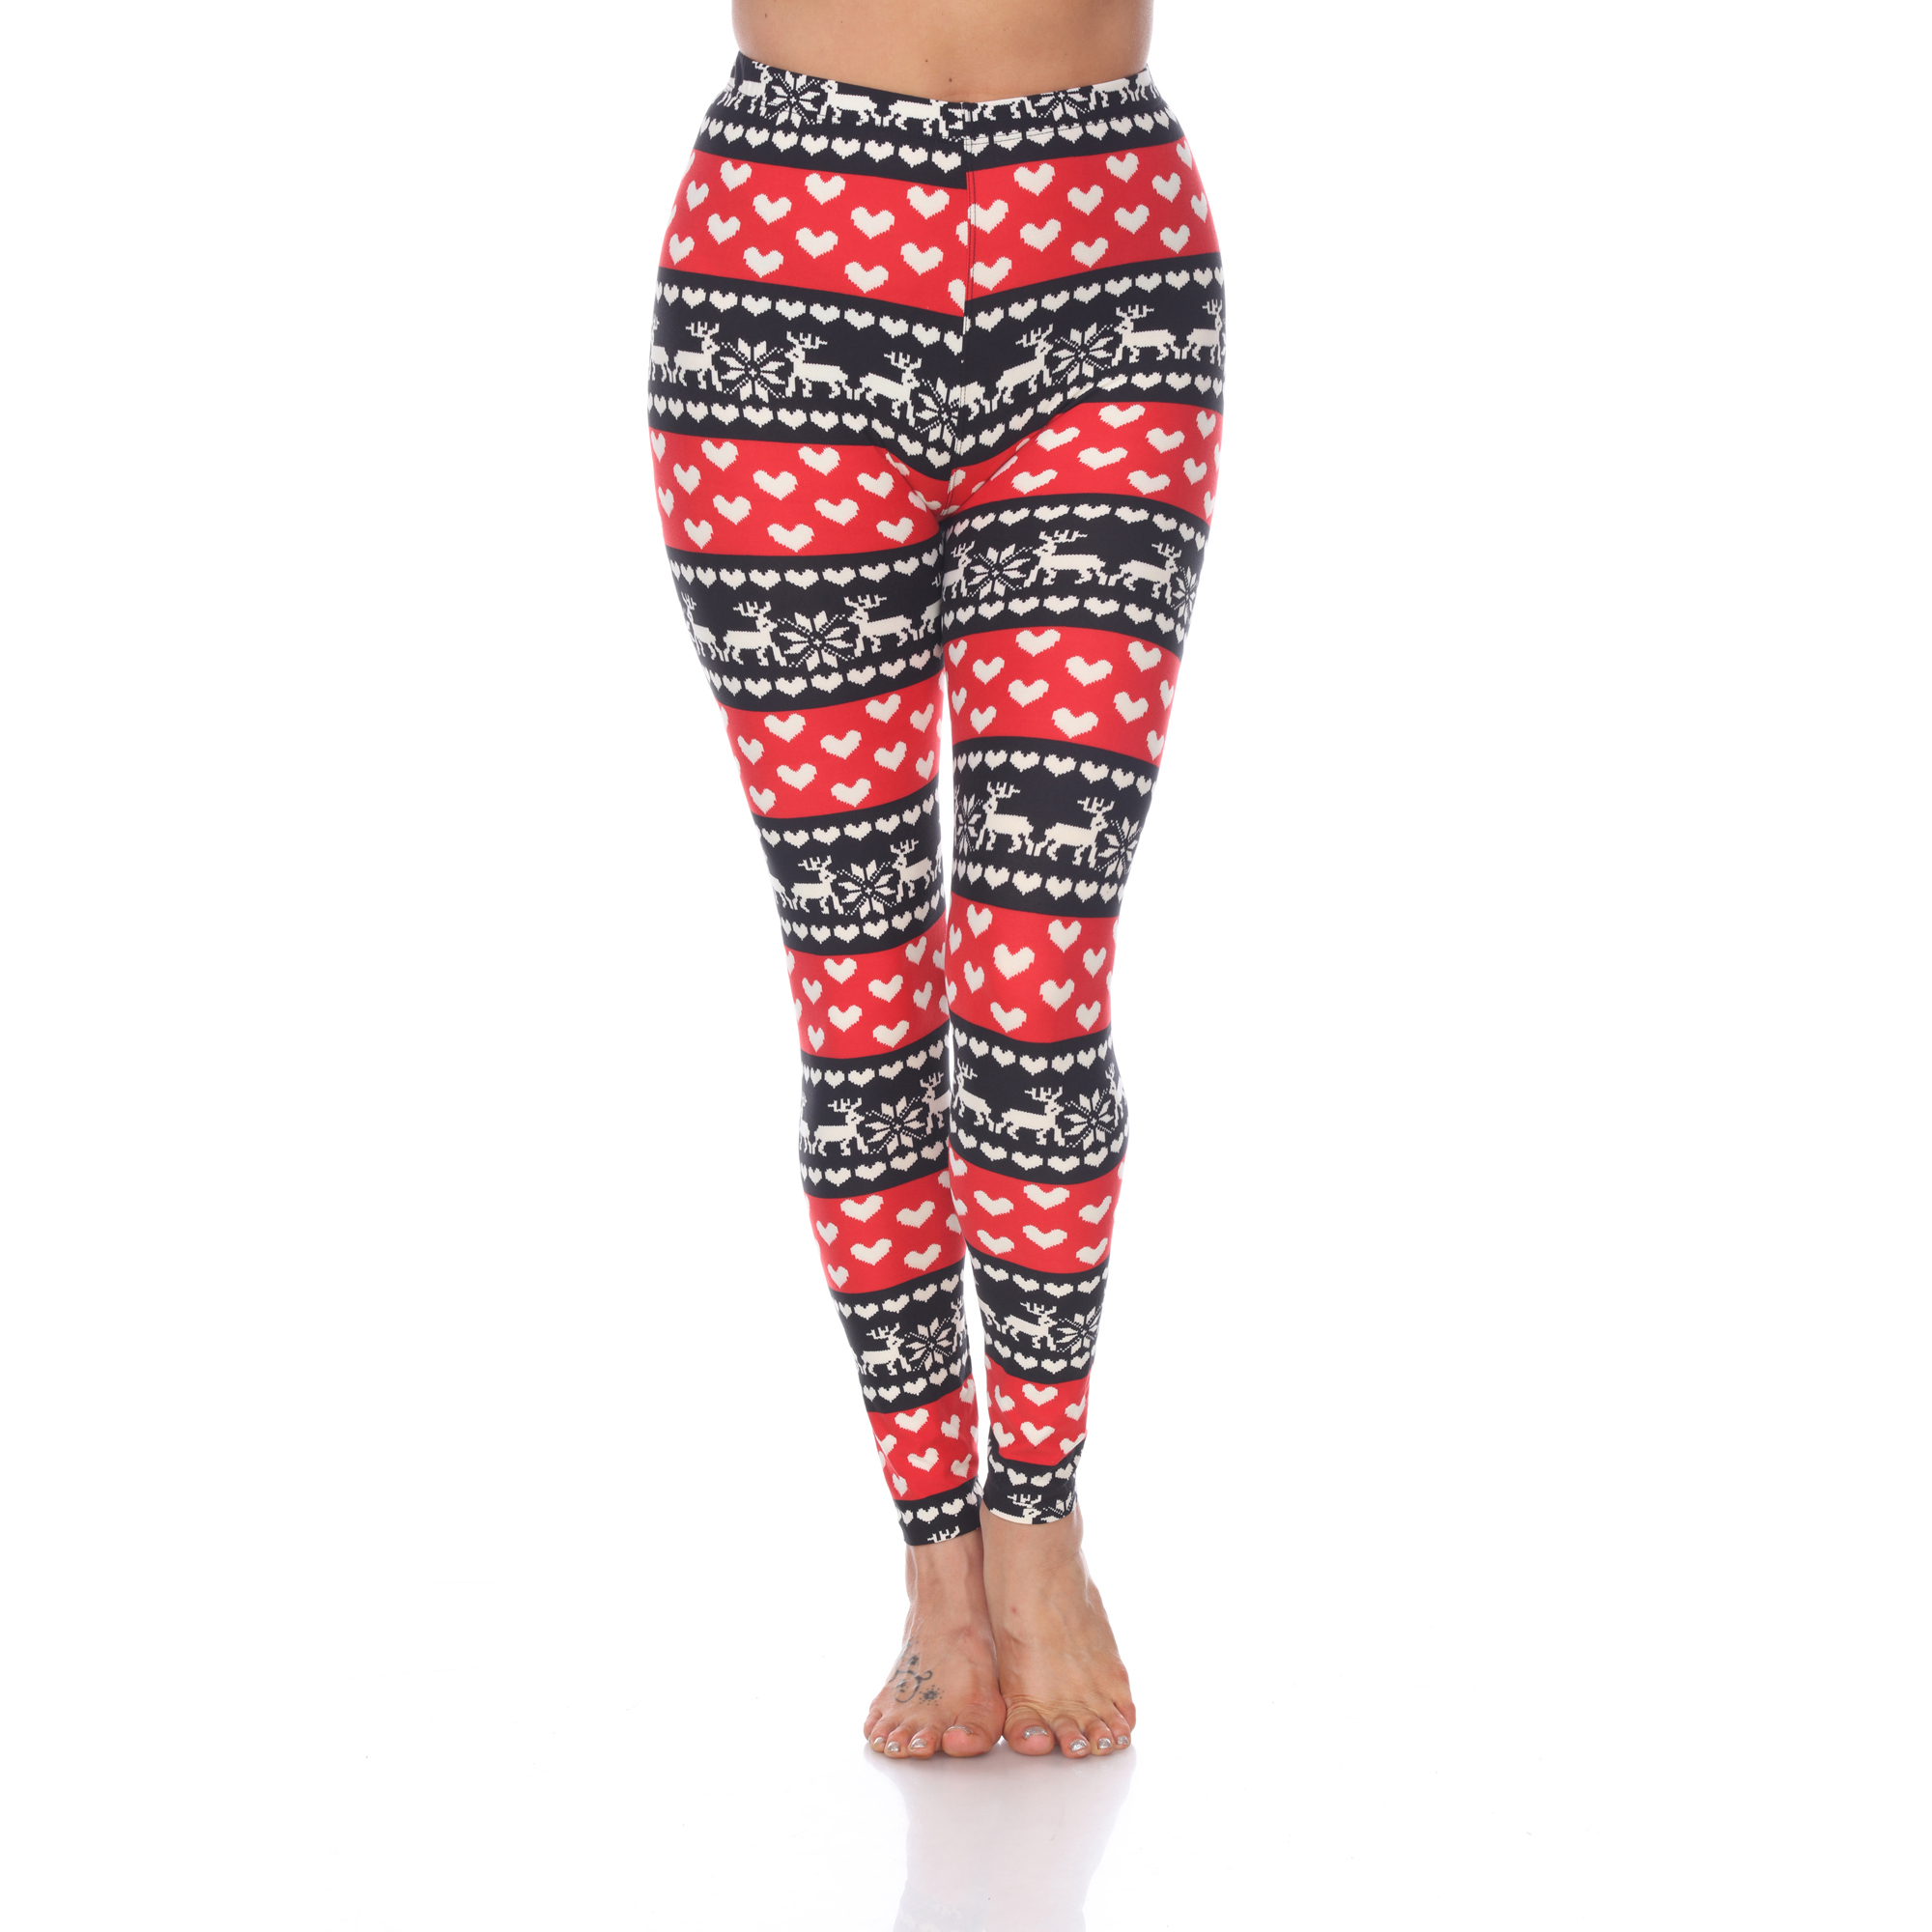 White Mark Women's Holiday Print Stretch Leggings - Red/White, One Size